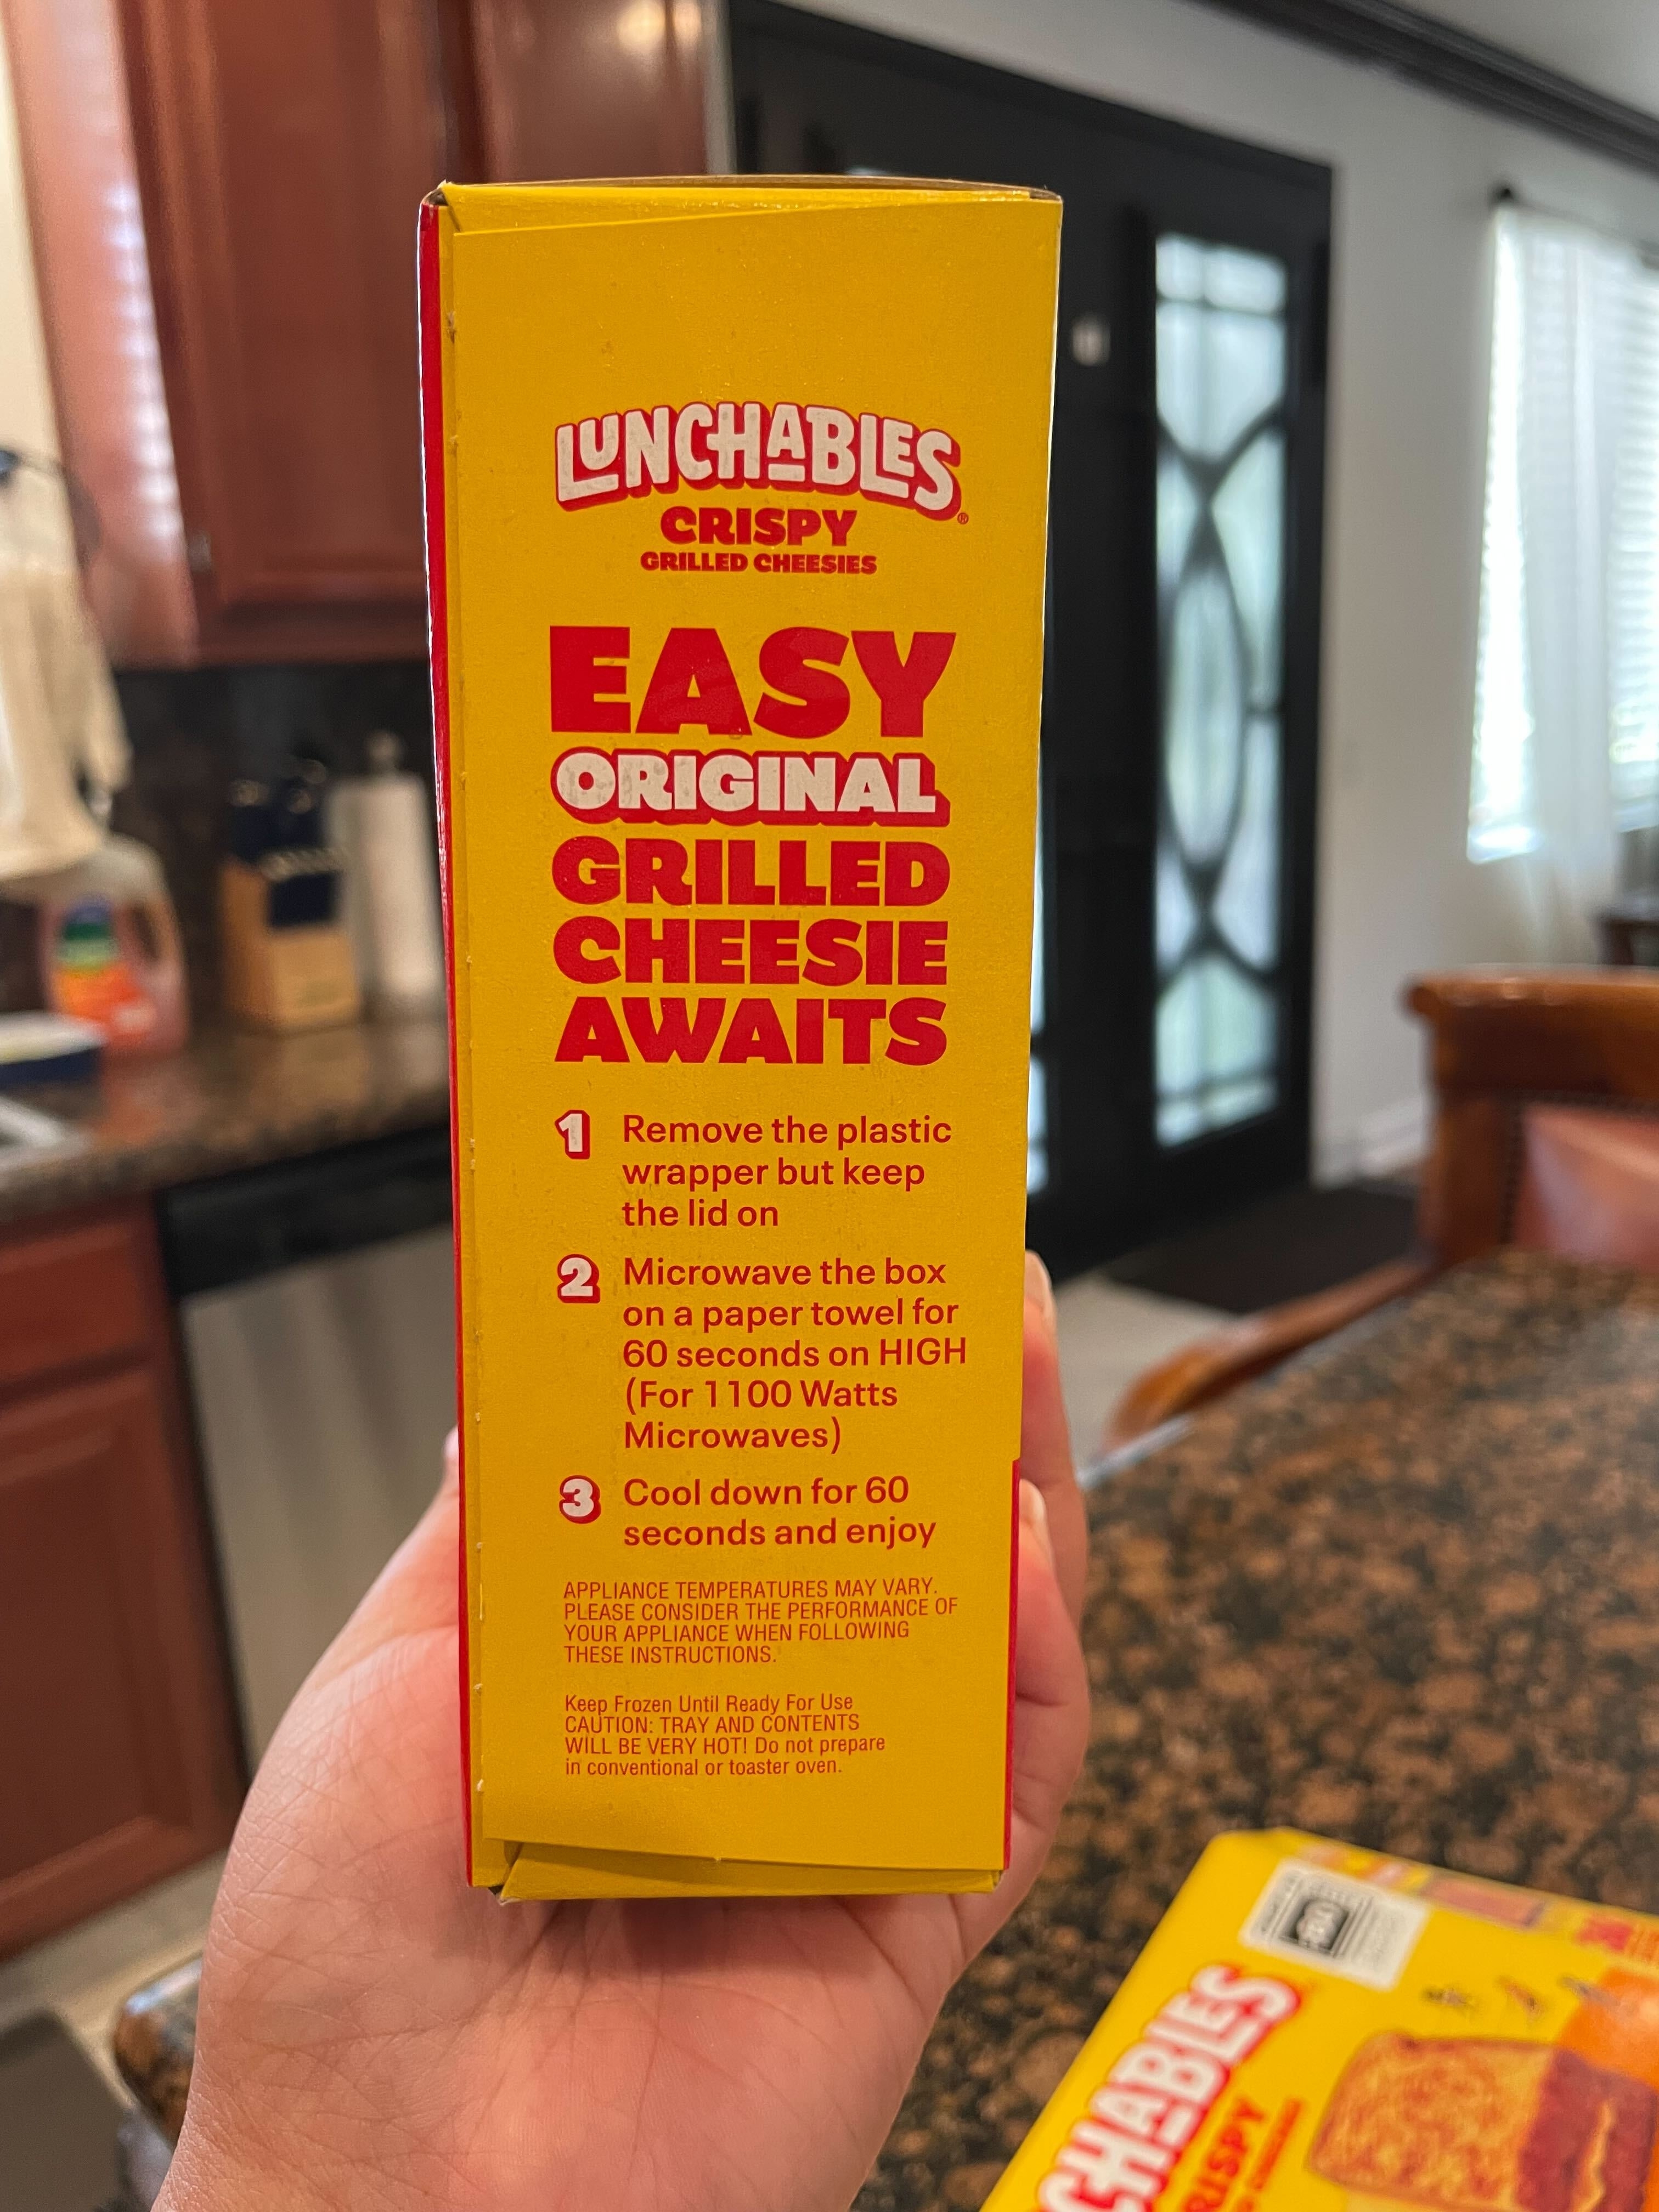 A hand holding a Lunchables Grilled Cheesies box with instructions on how to prepare the meal